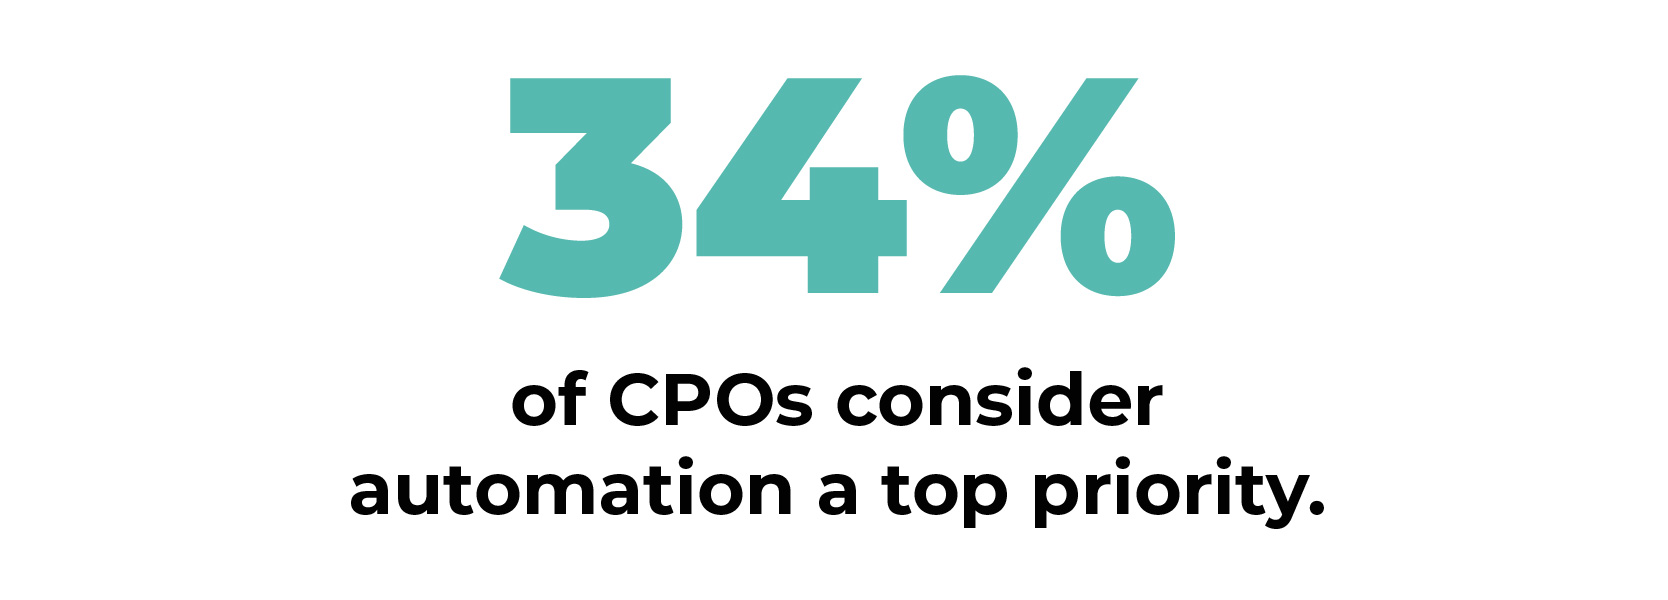 34 percent of CPOs consider automation a top priority-RFP360